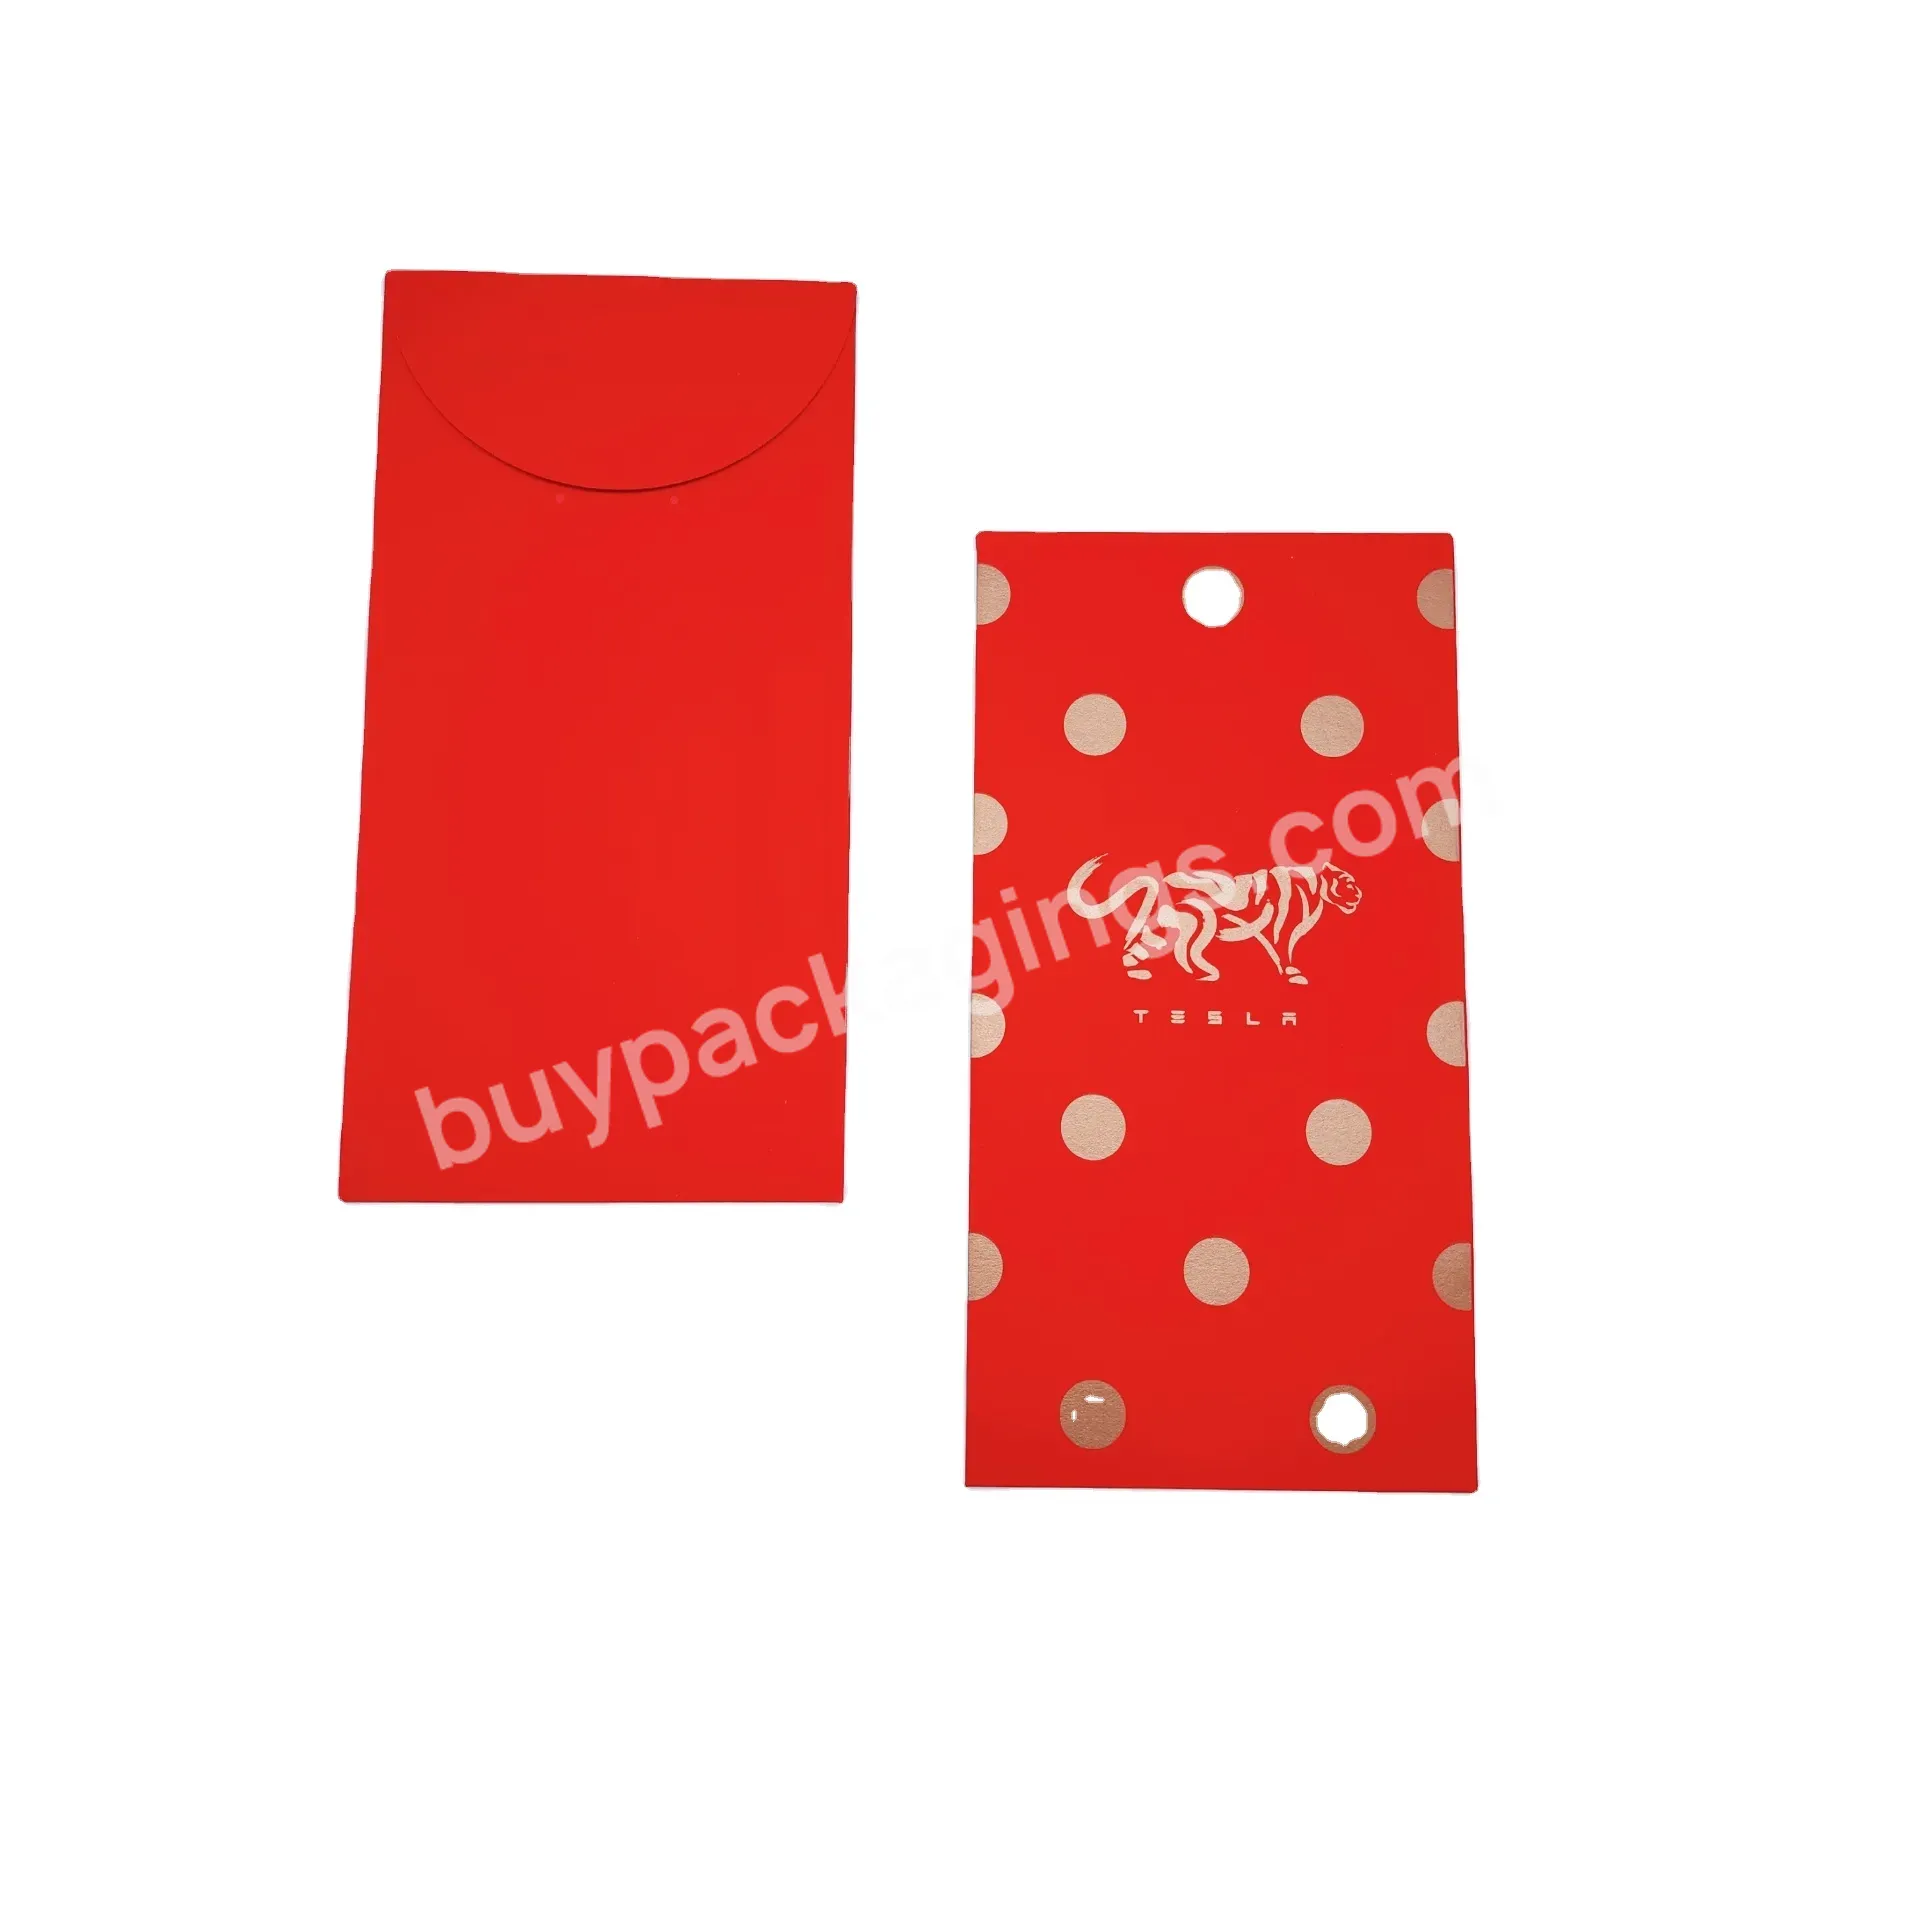 2023 Chinese/singapore New Trend Red Paper Envelope Printing Envelope Red Envelope Printing Manufacture